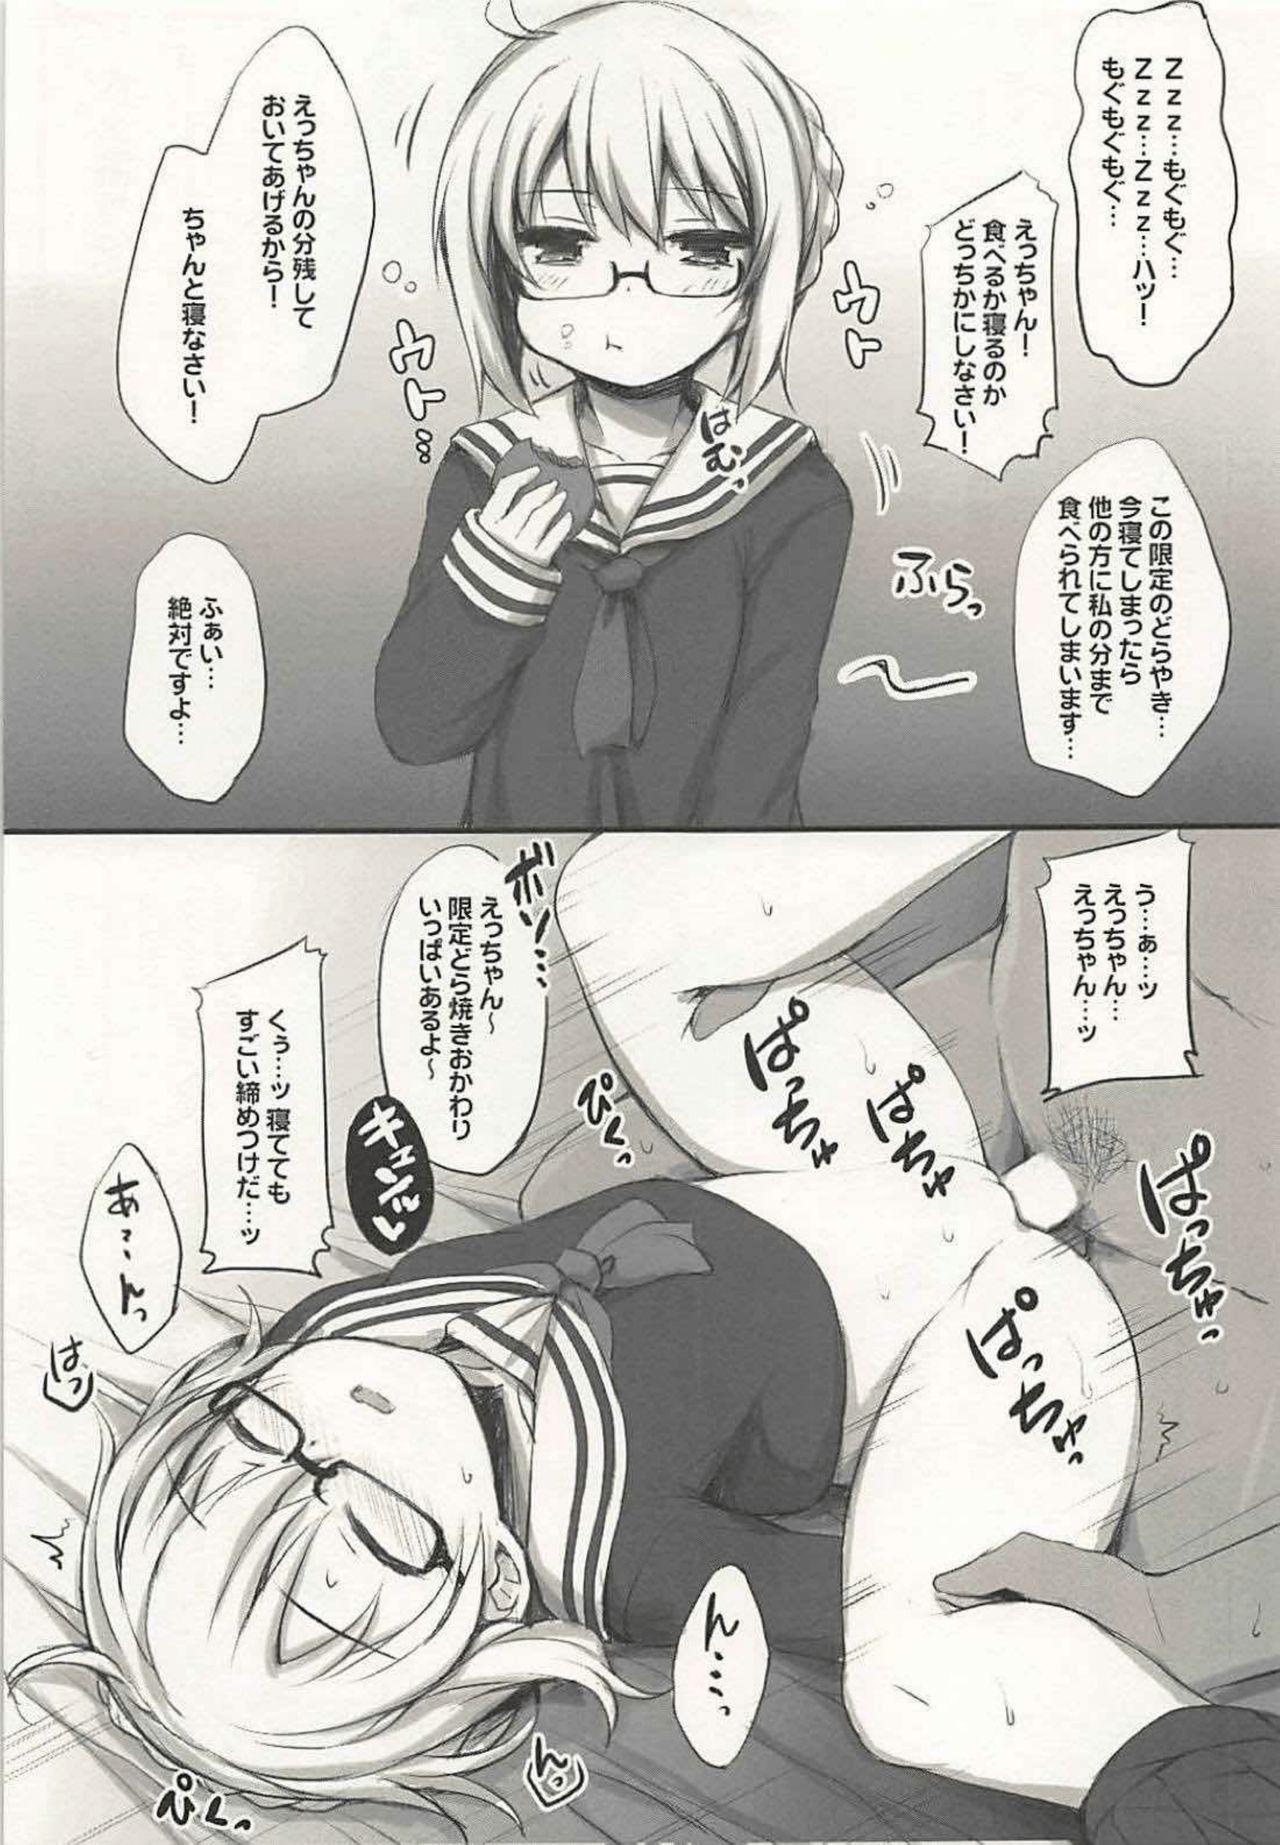 Pounded 2-koma de Servant to H Suru Hon. - Fate grand order Wives - Page 12